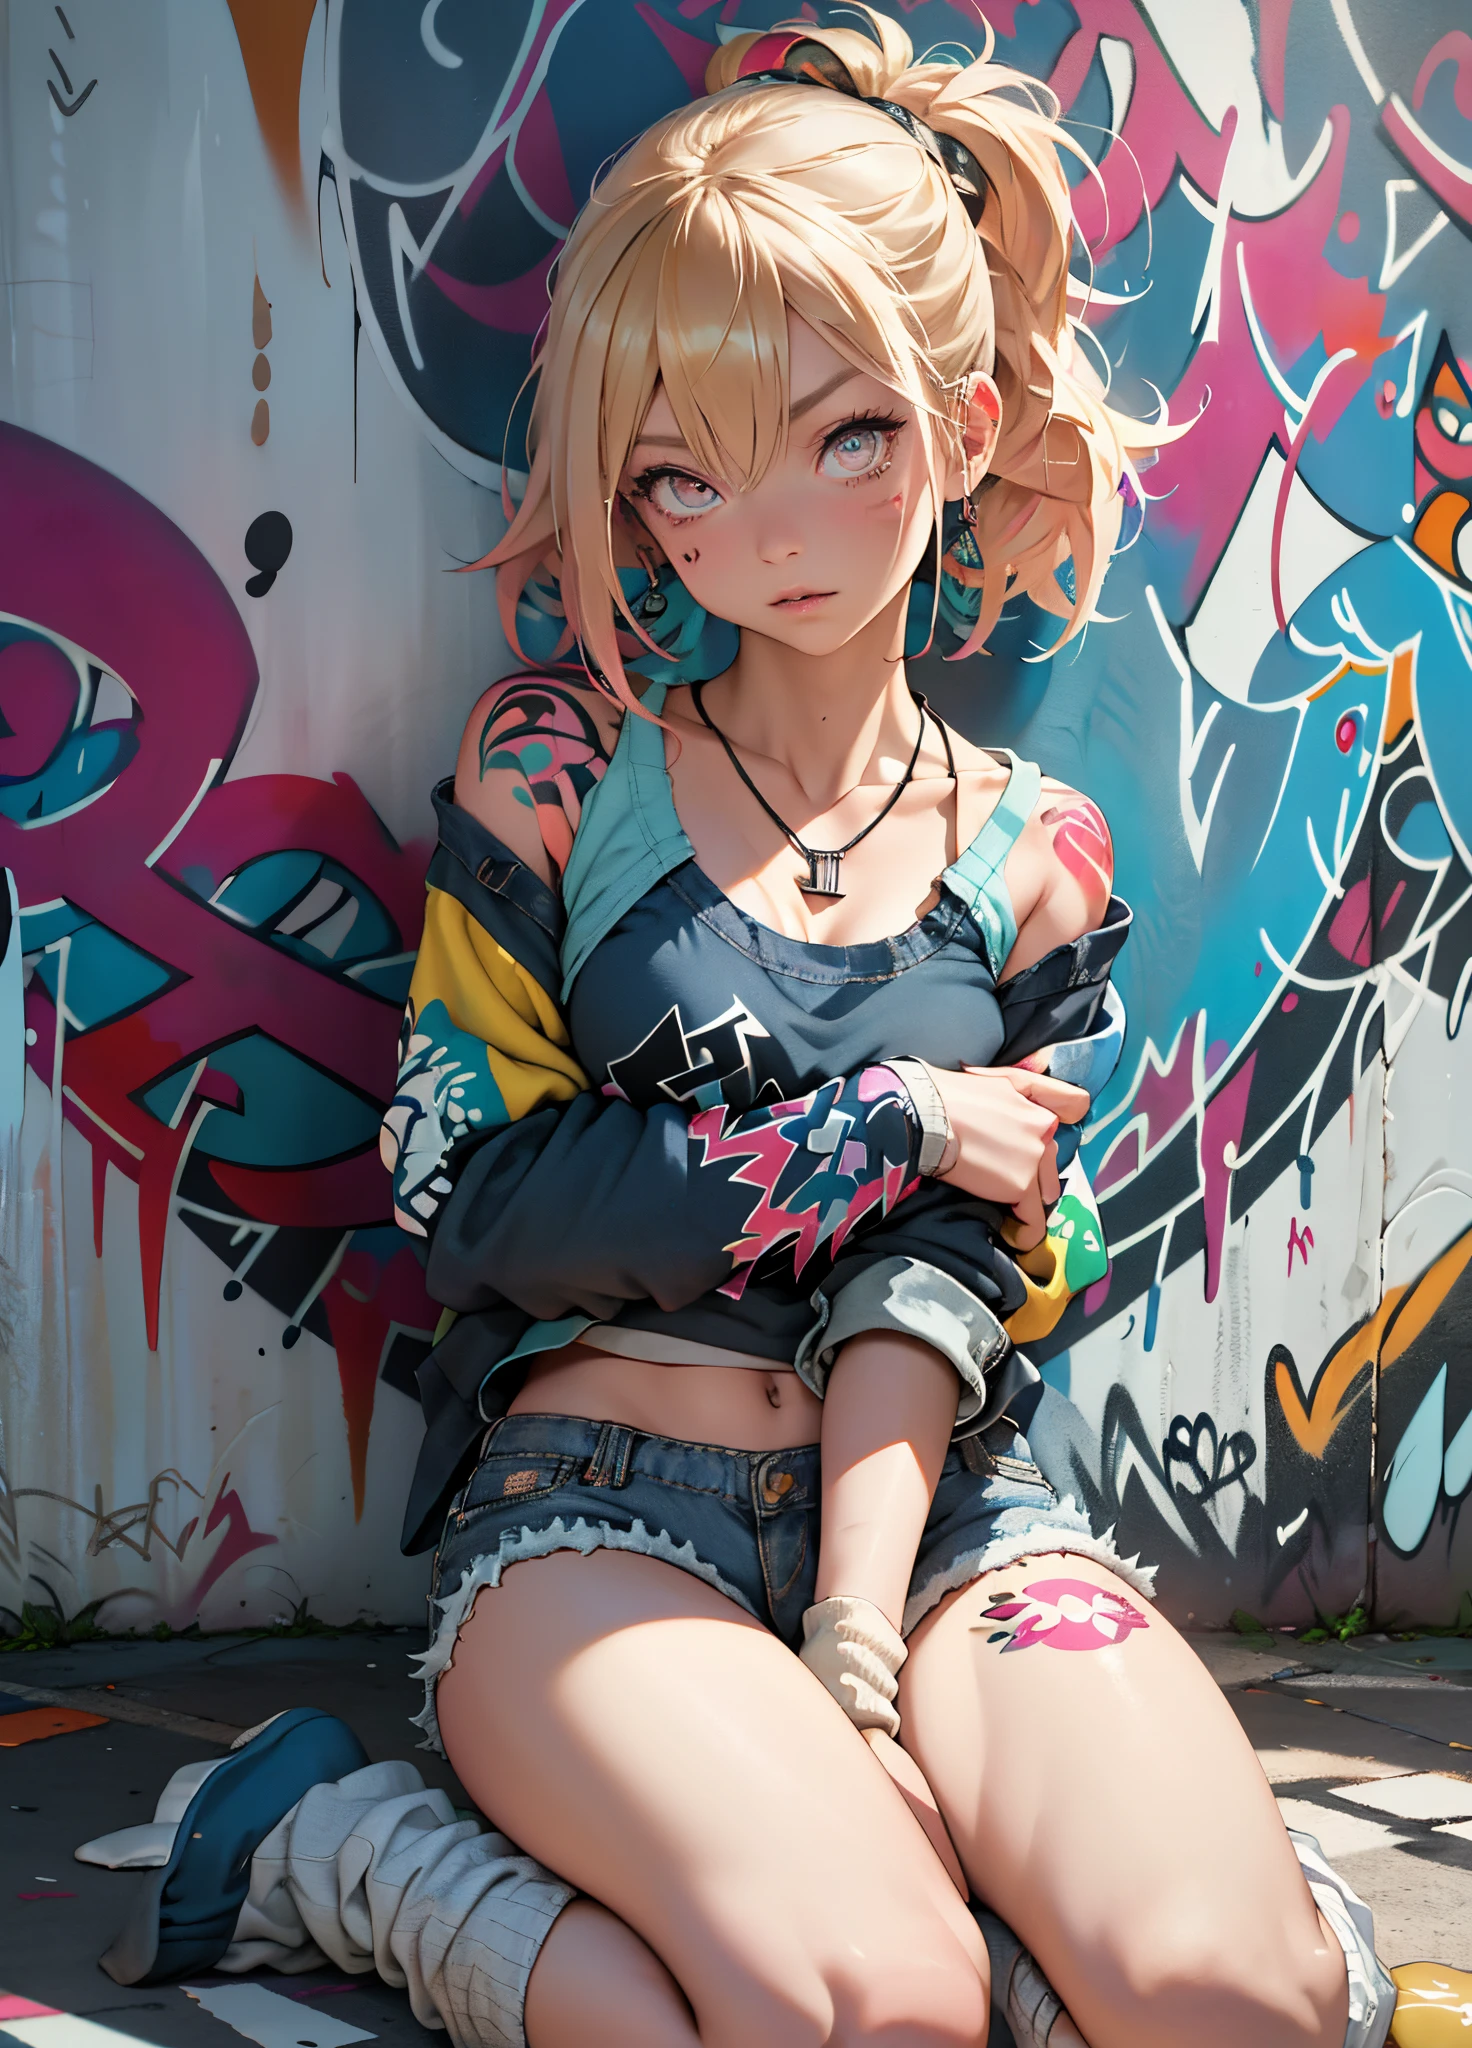 masutepiece, Best Quality, Realistic, One Woman、a blond、Solo, croptop , Denim shorts,Loose Socks、boots、 Necklace, (Graffiti:1.5), Paint splashes, behind arms, against a wall, gaze at the audience, Armbands, Thigh straps, paint on body, Head tilt, boredom, multicolored hair, aqua eyes,